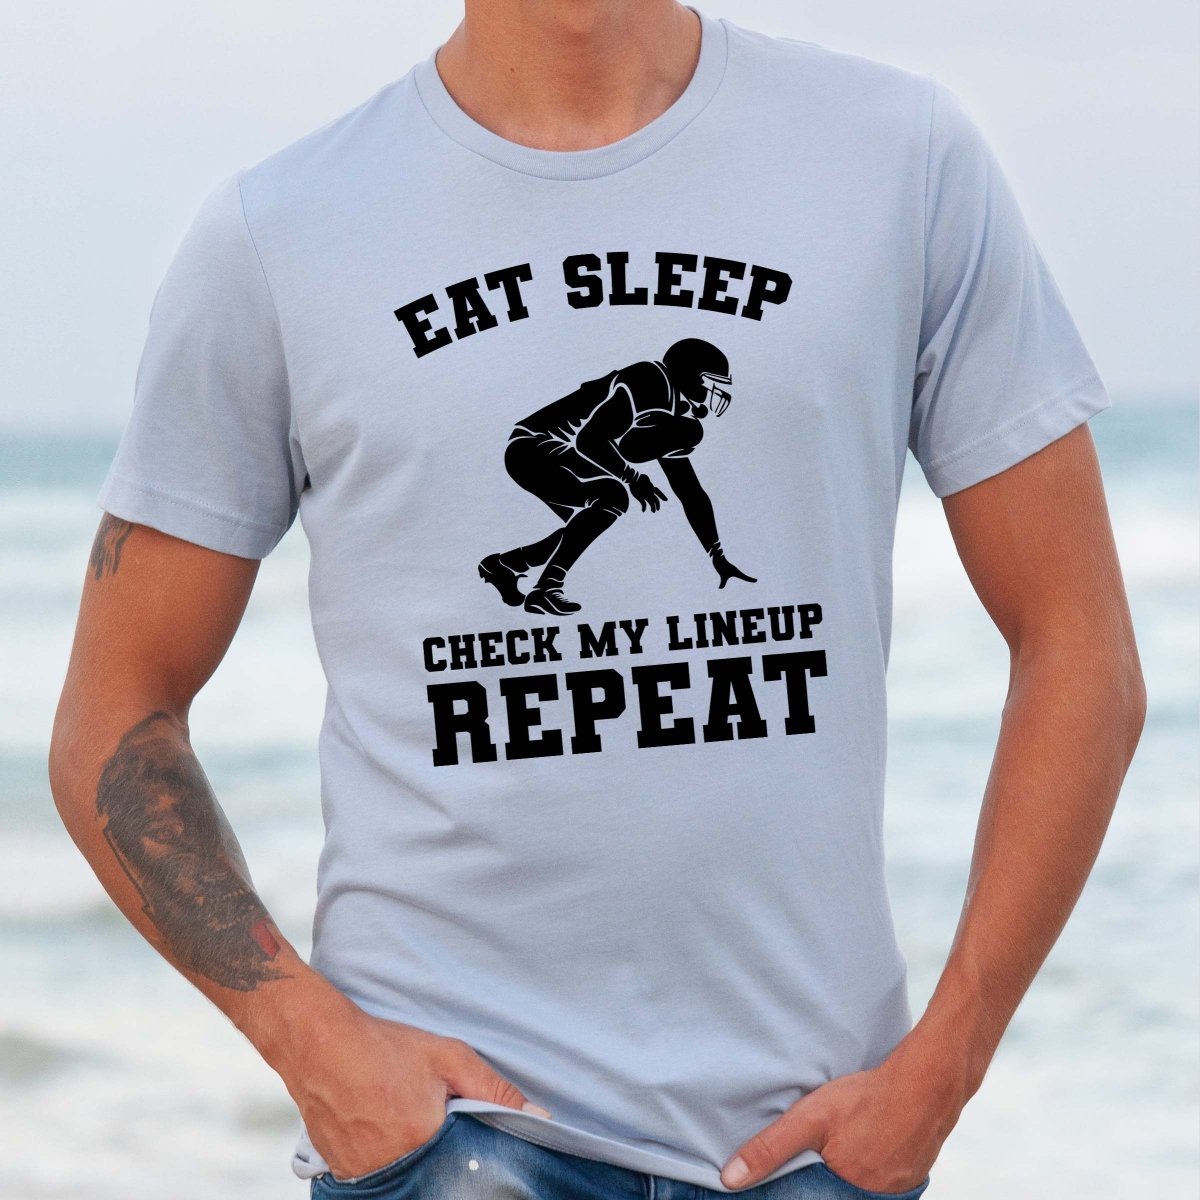 Eat Sleep Check my lineup Repeat Tee - Limeberry Designs